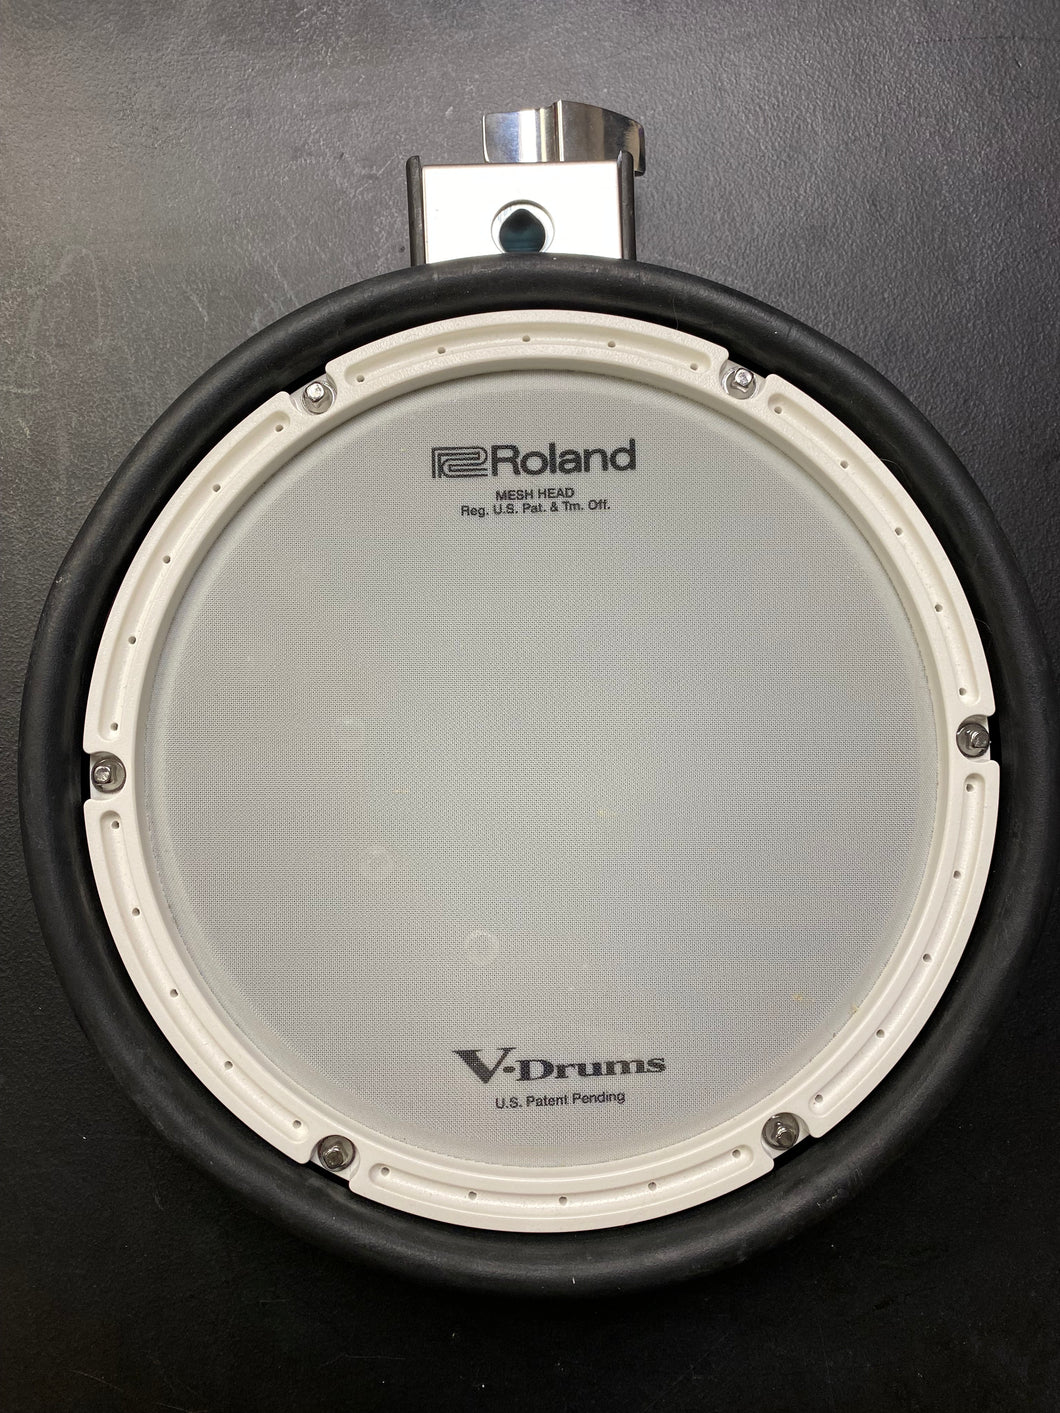 Roland PDX-8 Electronic Drum Pad - Used 9719